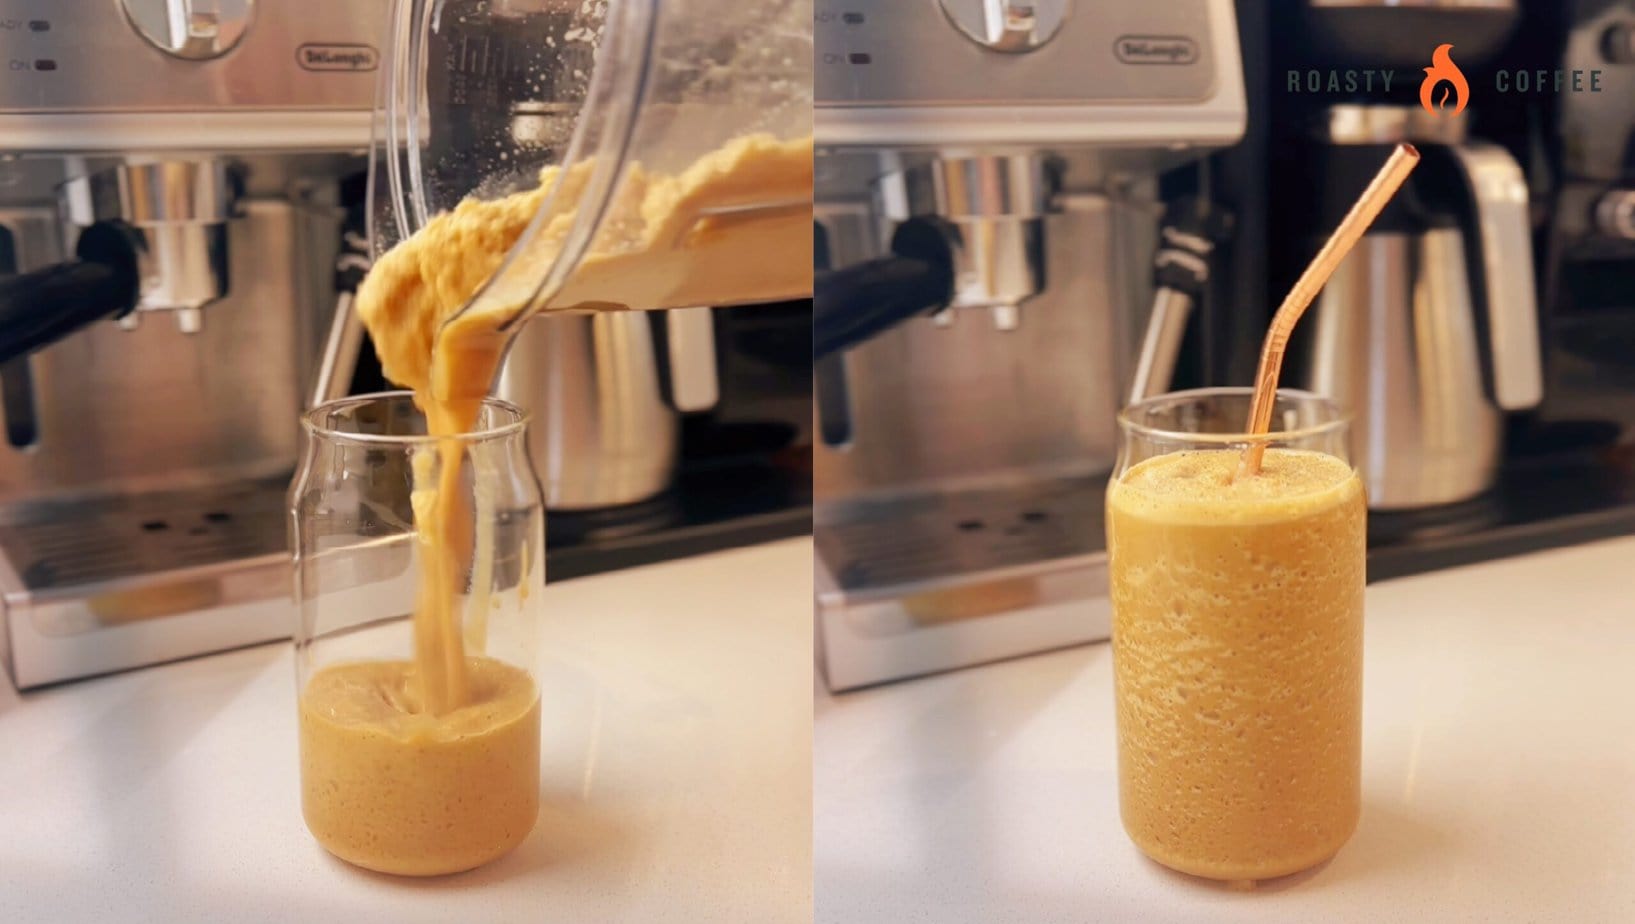 Frappuccino is poured into a glass from a blender